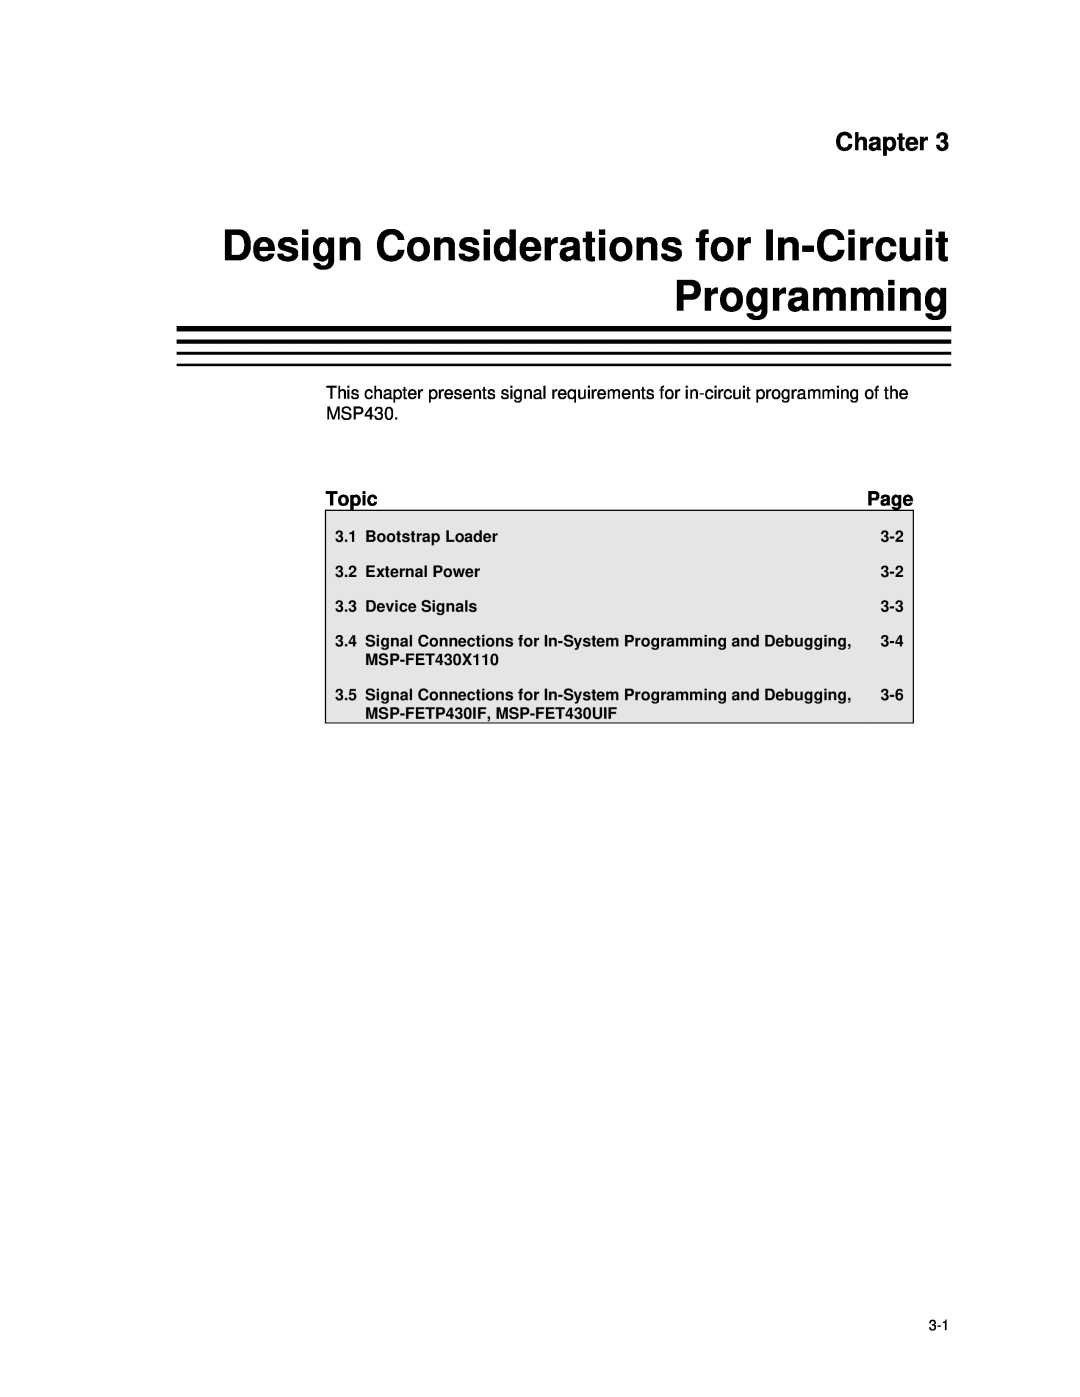 Texas Instruments MSP-FET430 manual Design Considerations for In-Circuit Programming, Chapter 